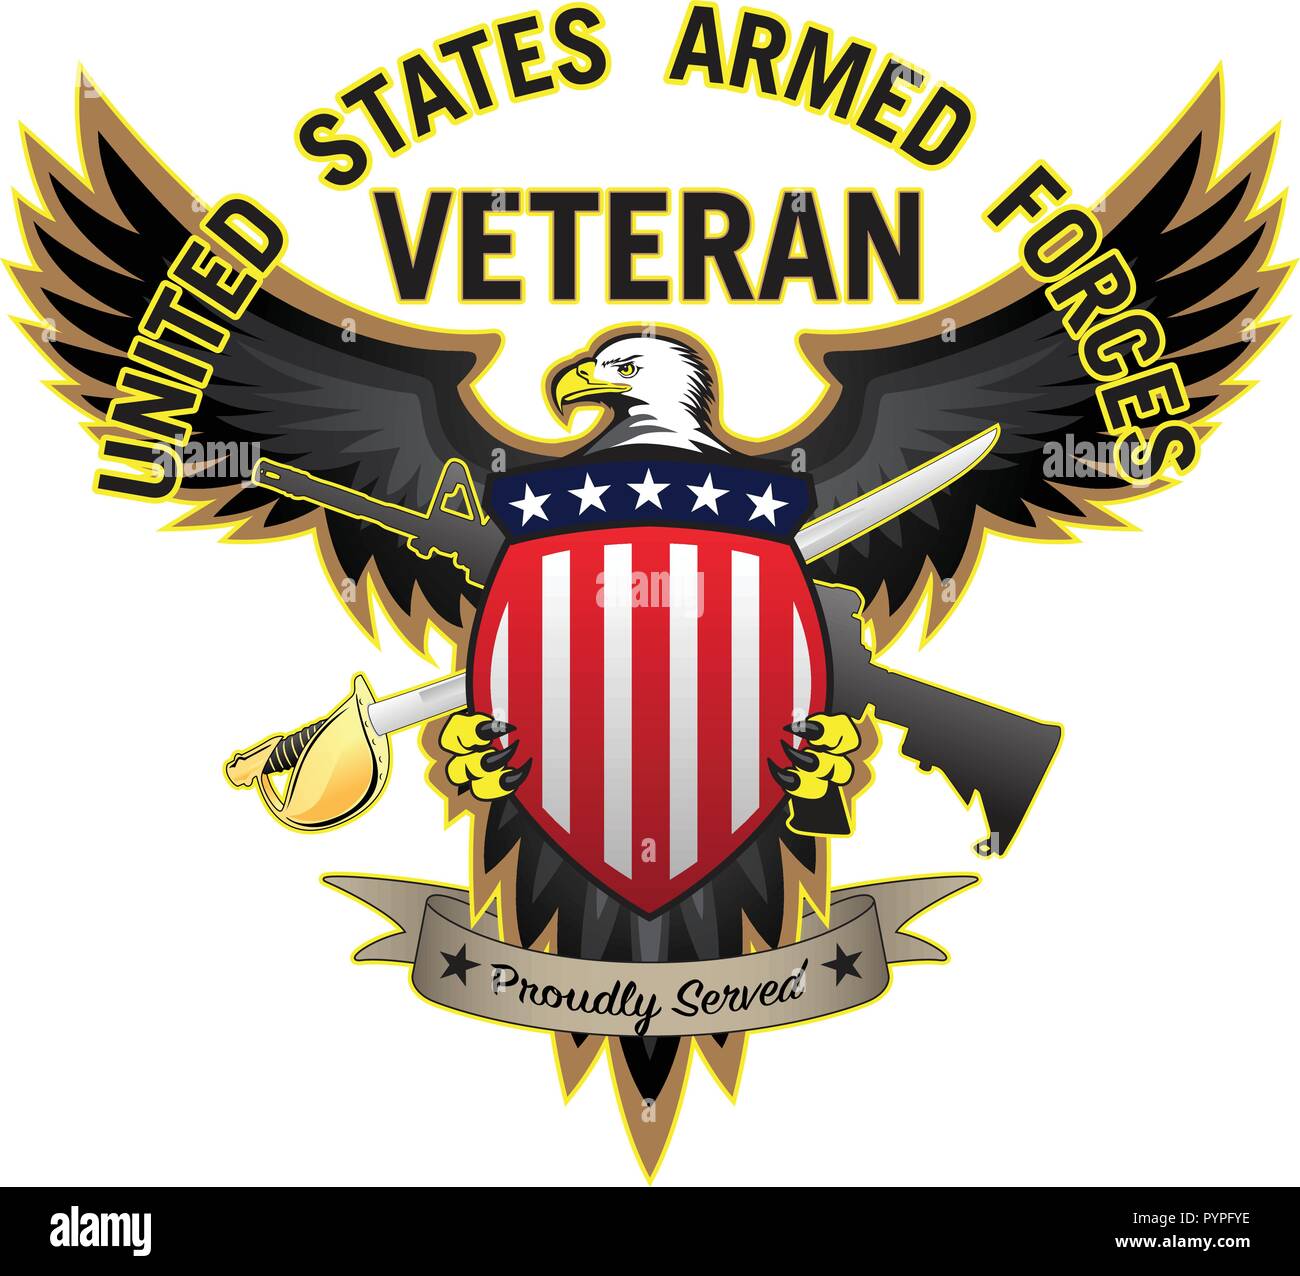 United States Armed Forces Veteran Proudly Served Bald Eagle Vector Illustration Stock Vector